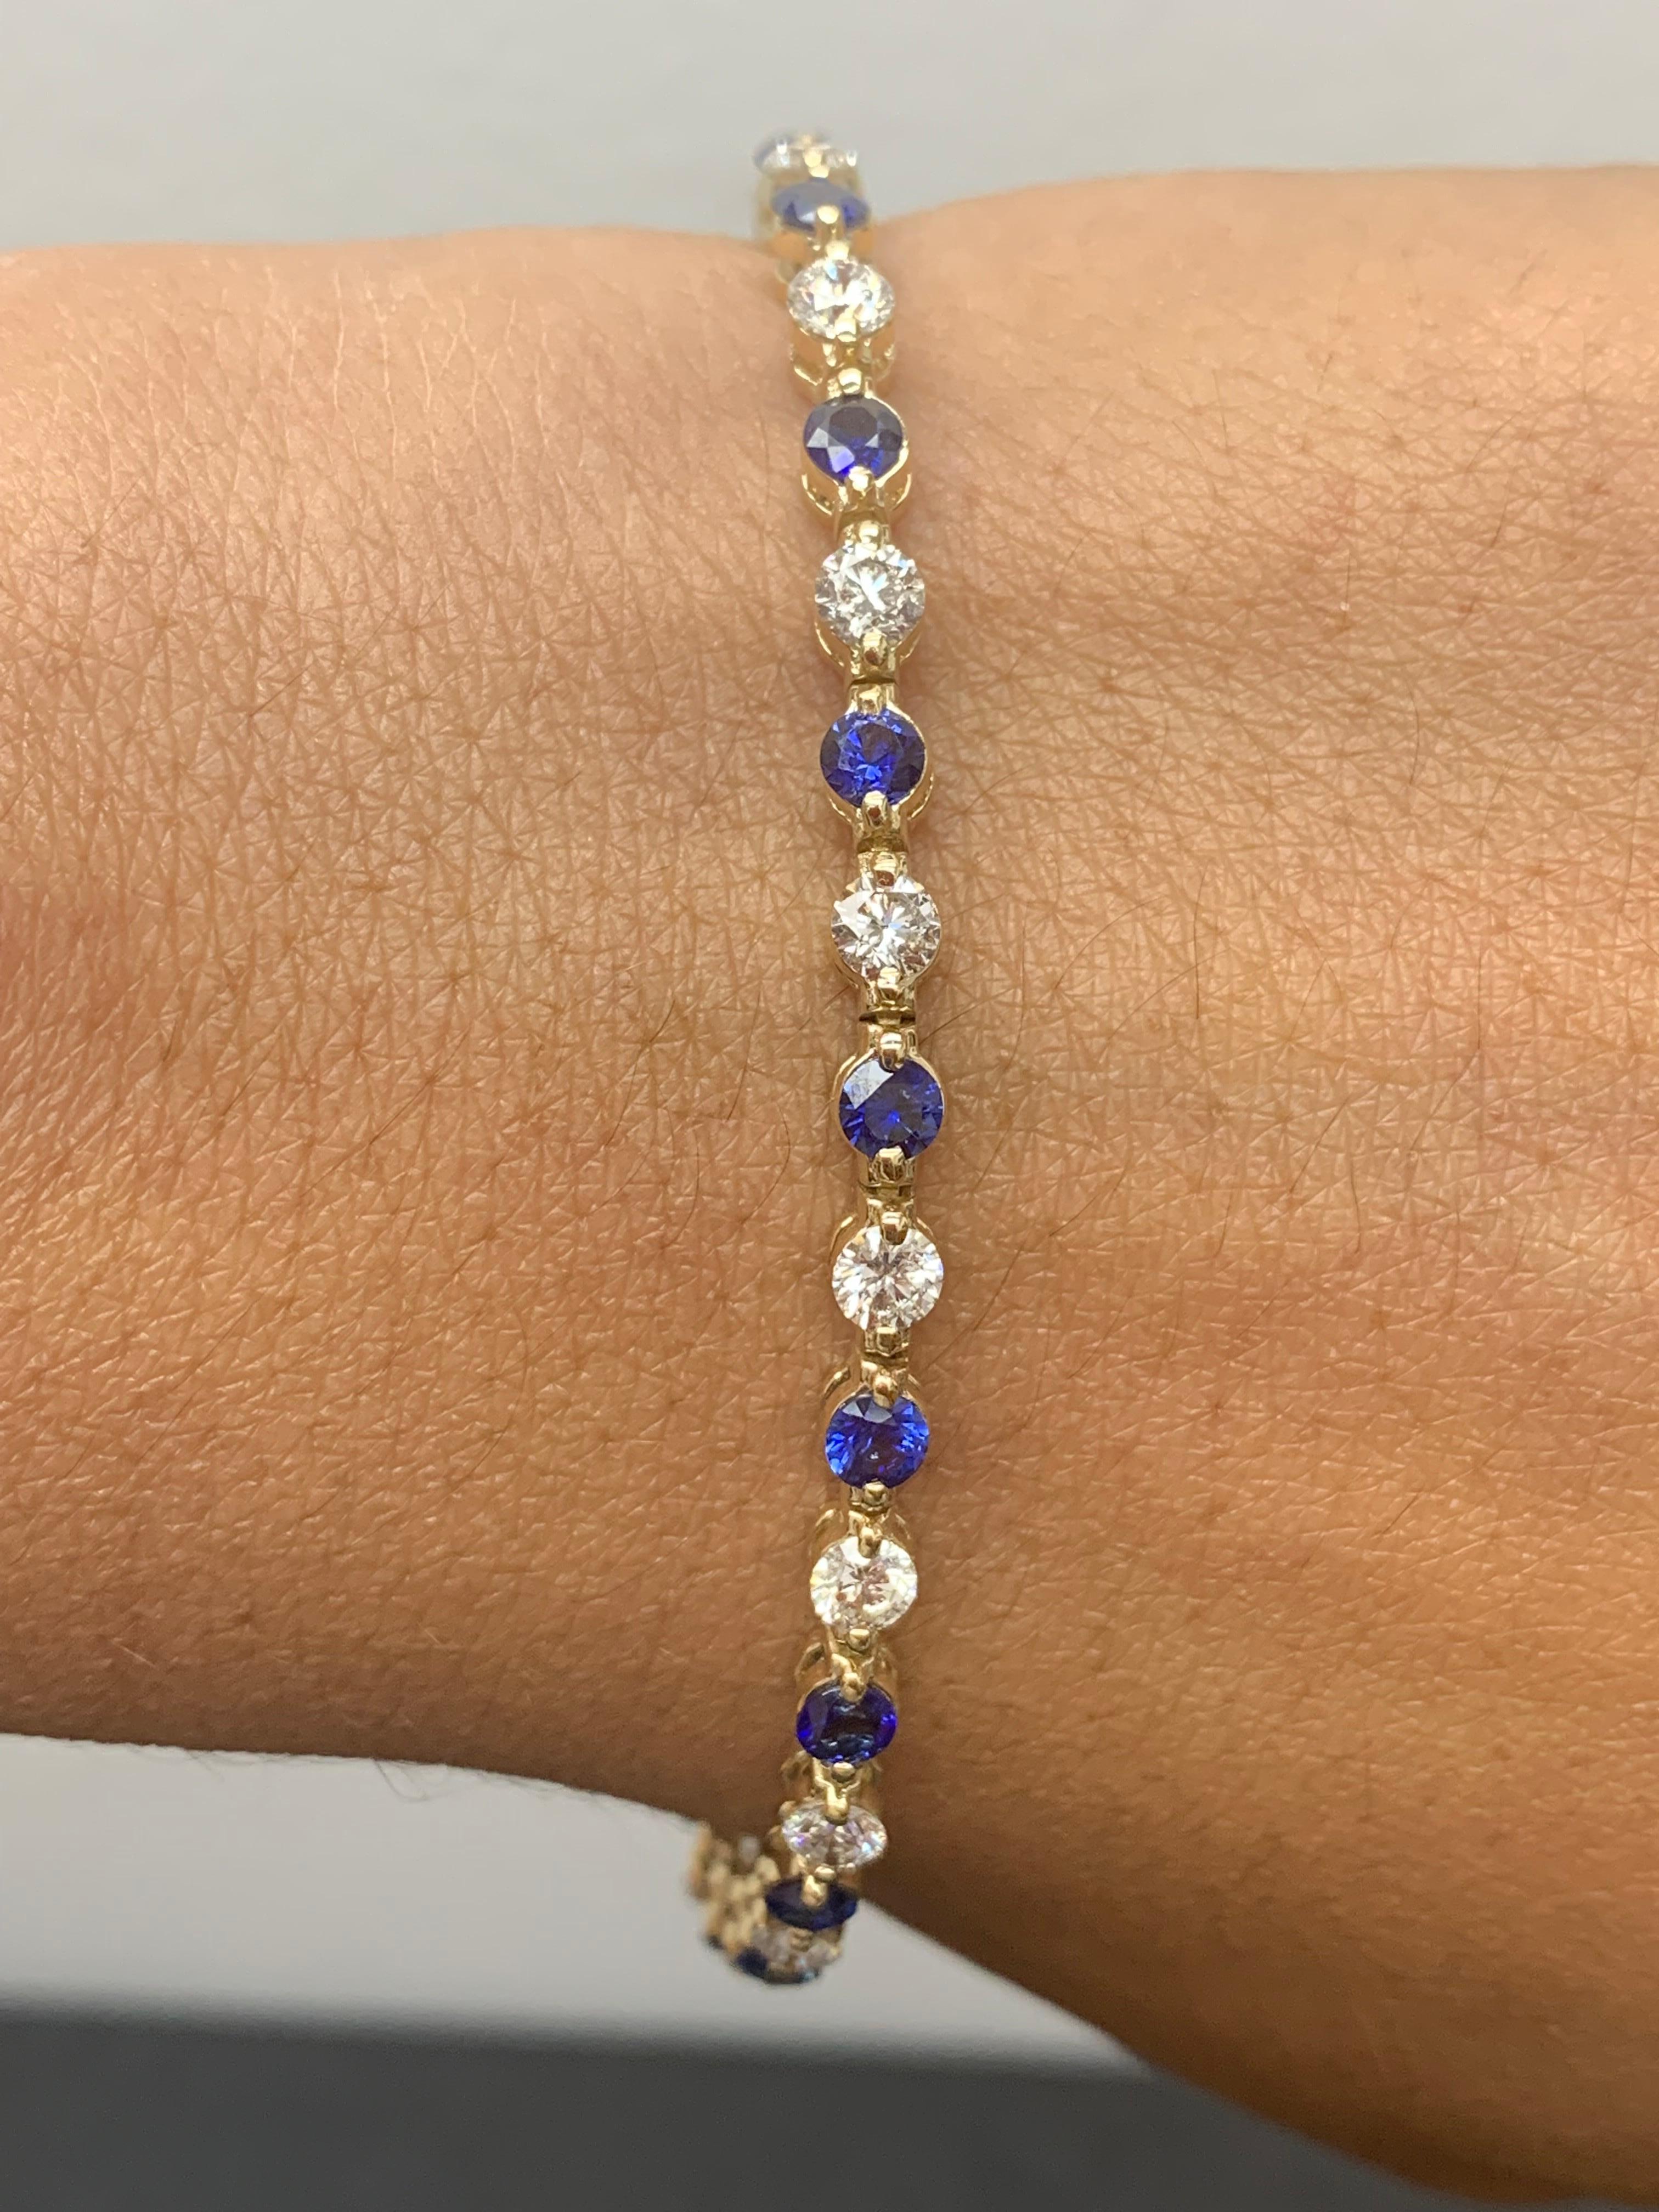 A stunning bracelet set with 18 stunning Blue sapphires weighing 3.18 carat total. Alternating these Blue Sapphires are 18 sparkling round diamonds weighing 2.88 carats in total. Set in polished 14k yellow gold. Double lock mechanism for maximum